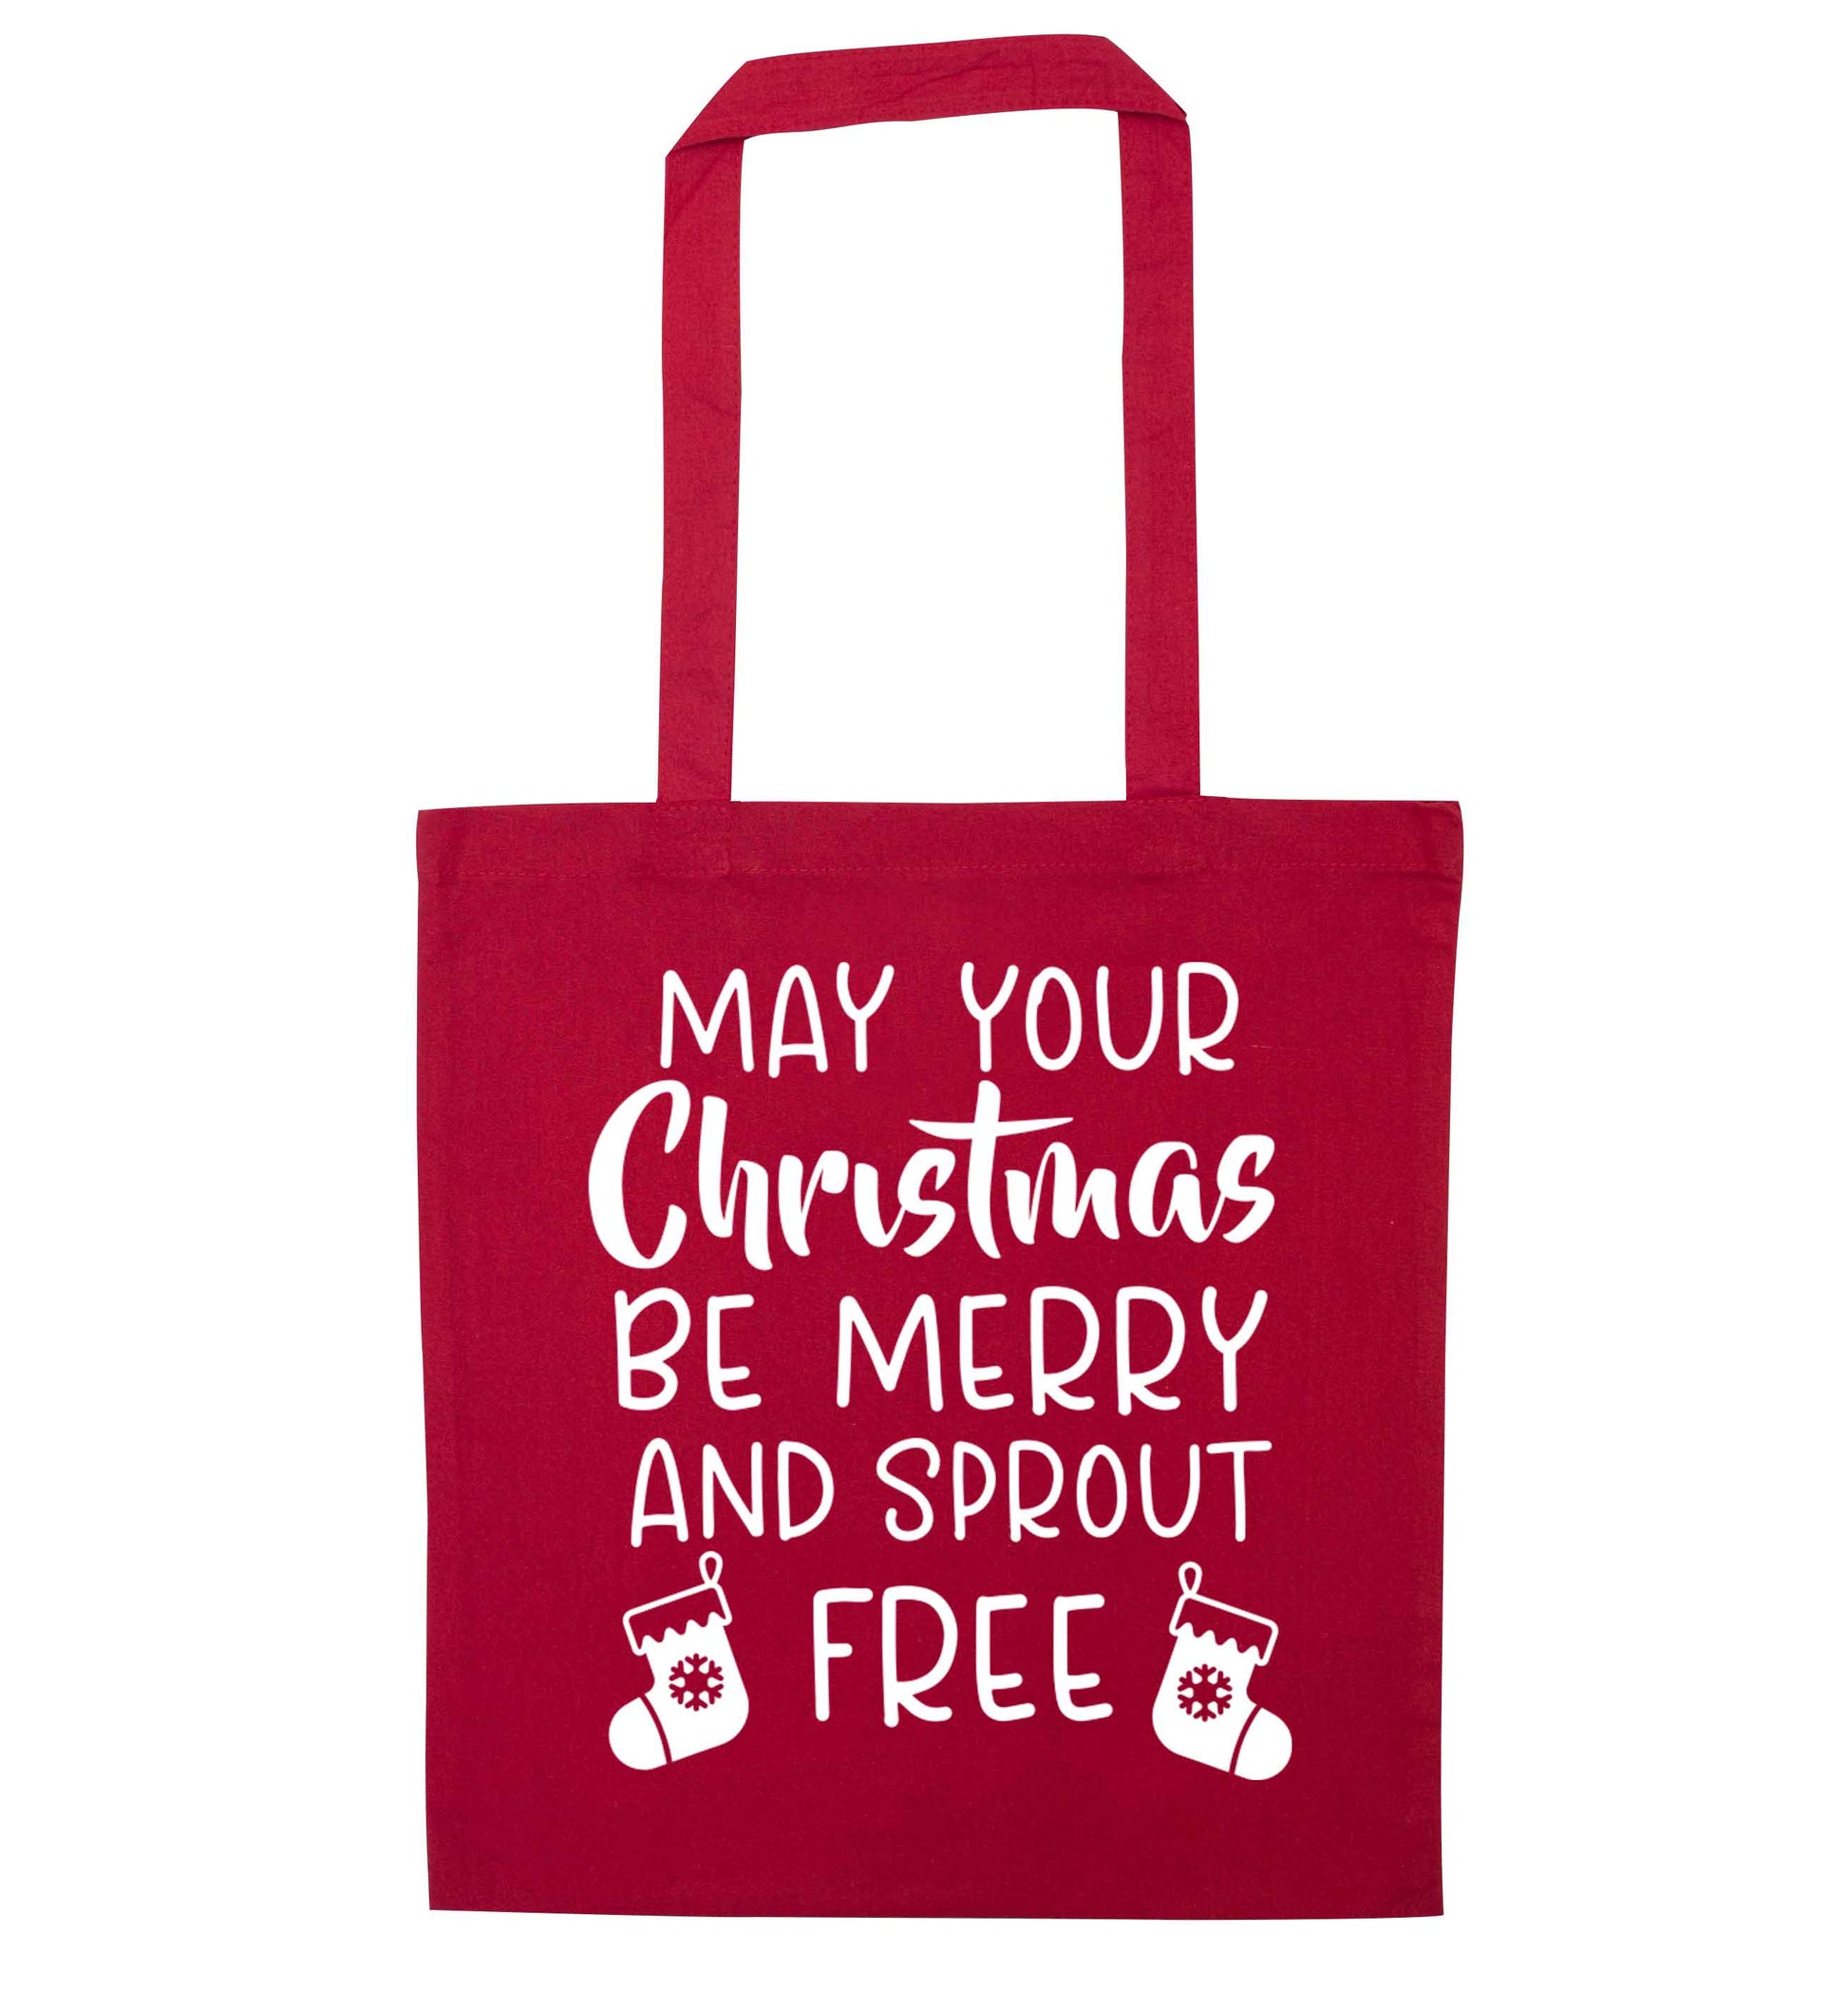 May your Christmas be merry and sprout free red tote bag